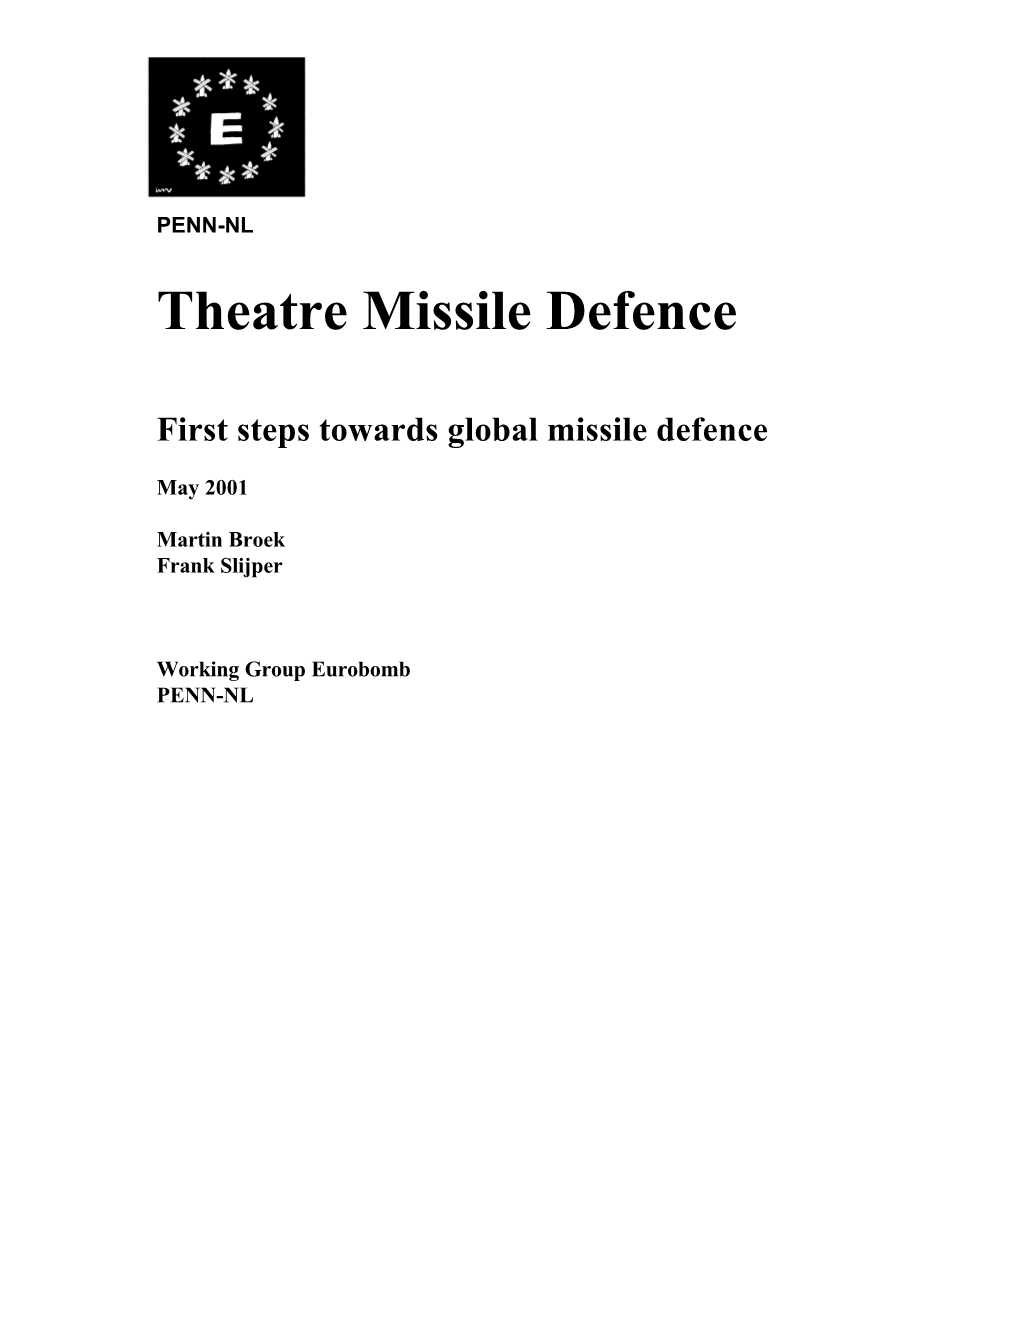 Theatre Missile Defence